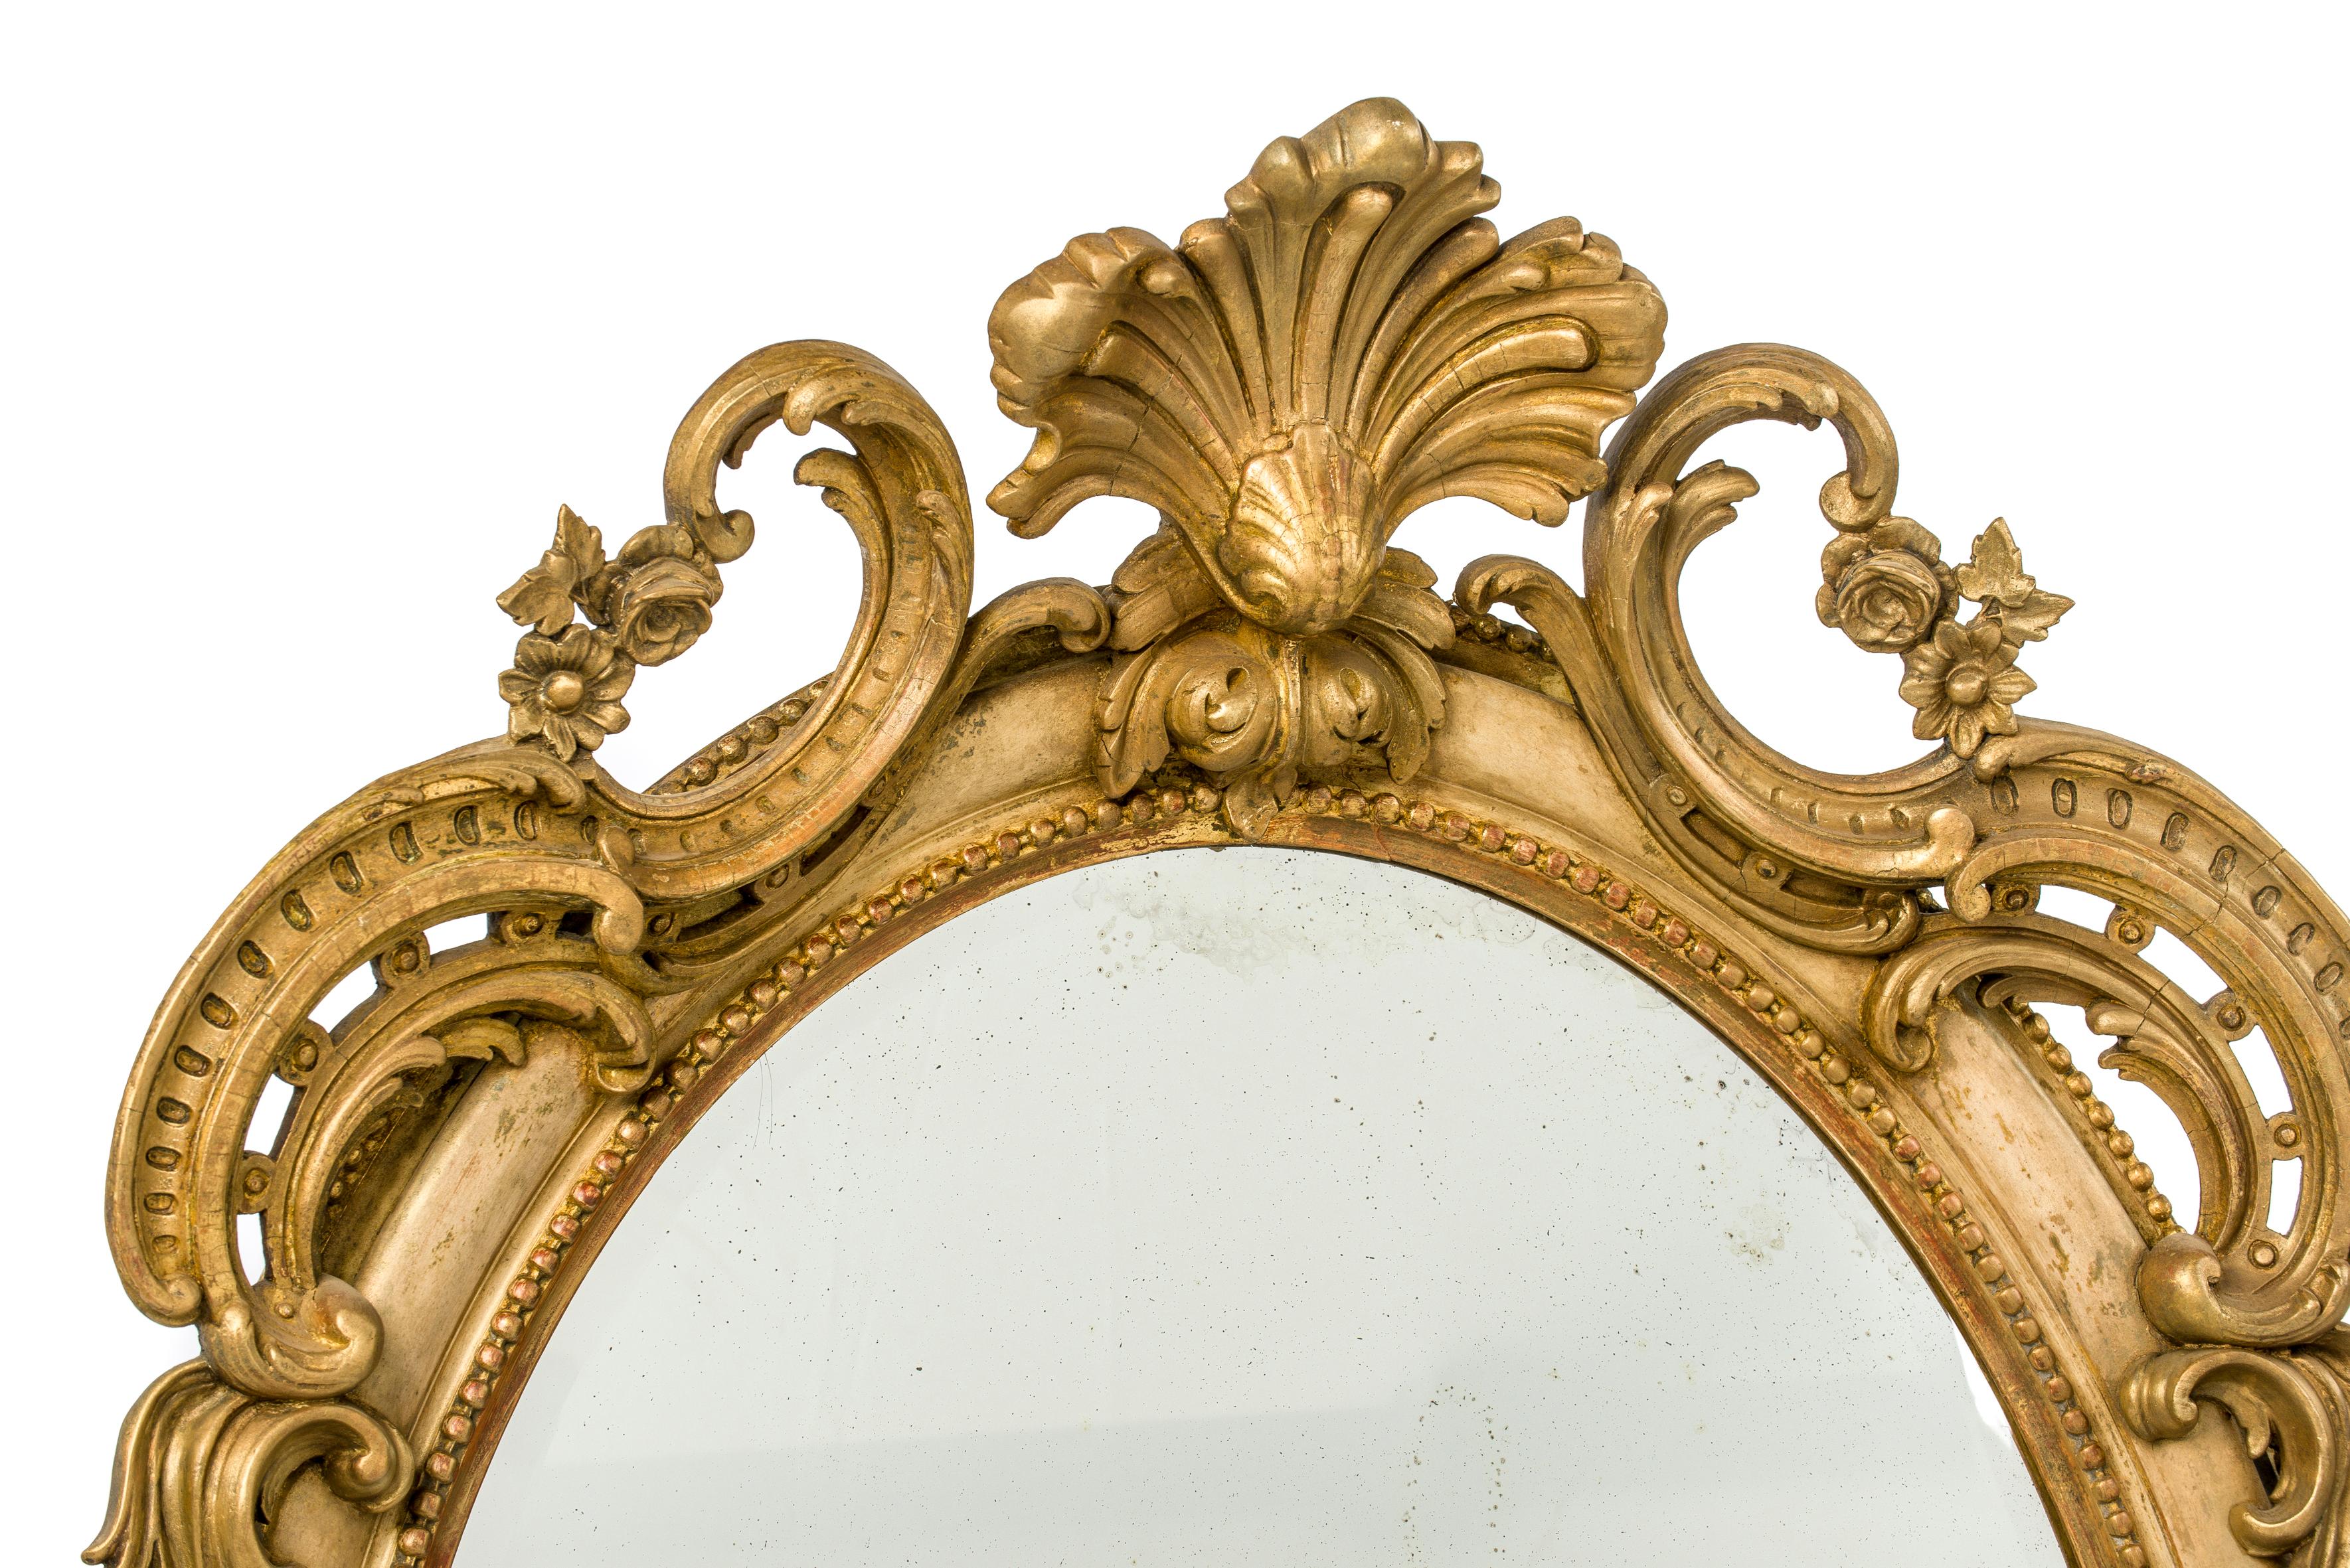 A beautiful large oval mirror with rich ornaments and original facetted mirror plate. 
The mirror has a very warm antique look and feel. The mirror has an ornate top decoration with a central “fleur de lis” with floral elements. At the bottom,